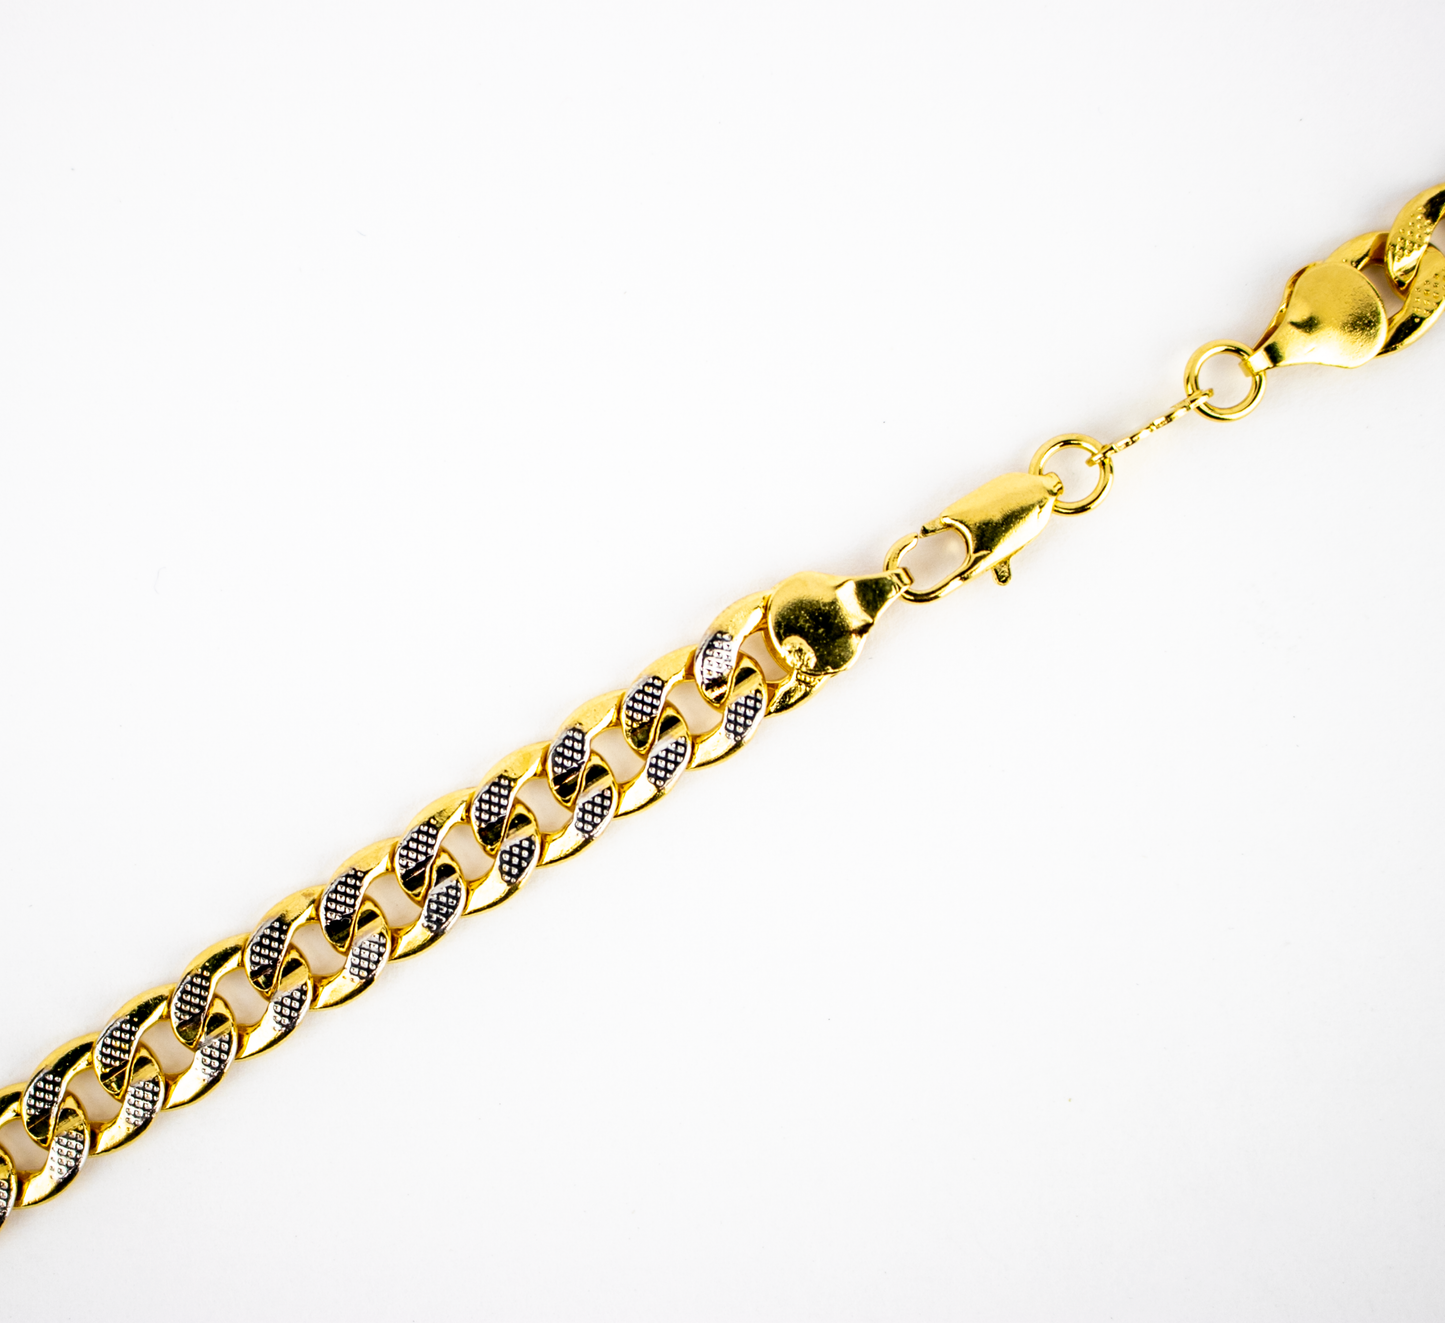 CUBAN LINK CHAIN TWO TONES GOLD FILLED 6MM (CAD-C-12-2T)